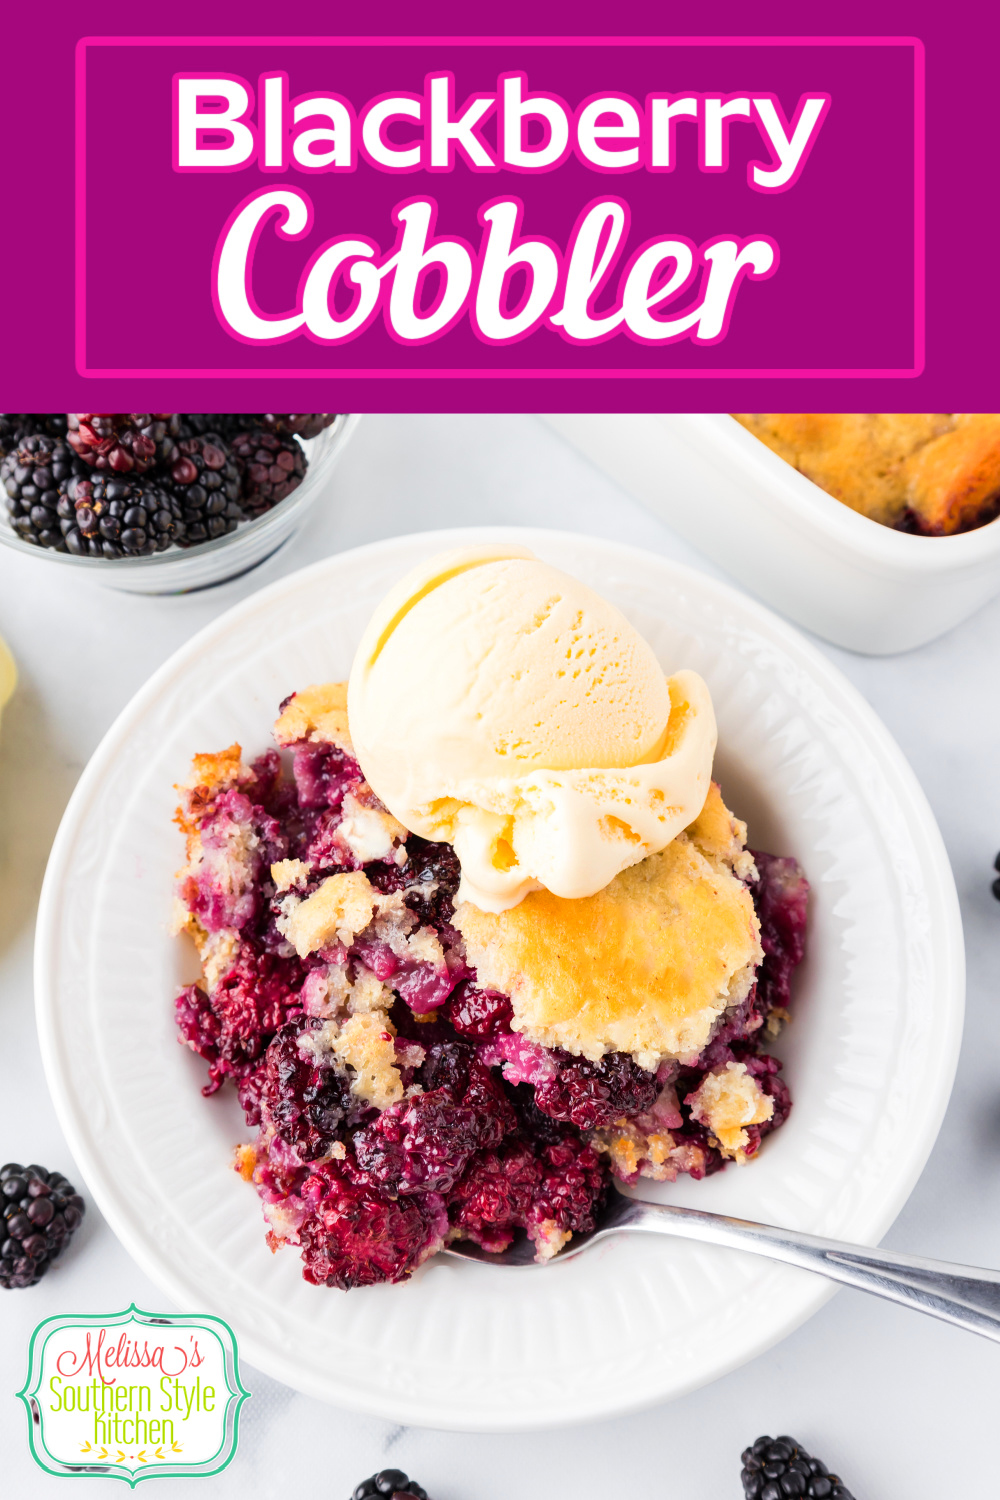 This old fashioned Blackberry Cobbler Recipe features fresh plump blackberries topped with a homemade batter that bakes puffy and golden. #blackberrycobbler #blackberries #cobblerrecipes #easycobblerrecipe #blackberrydesserts